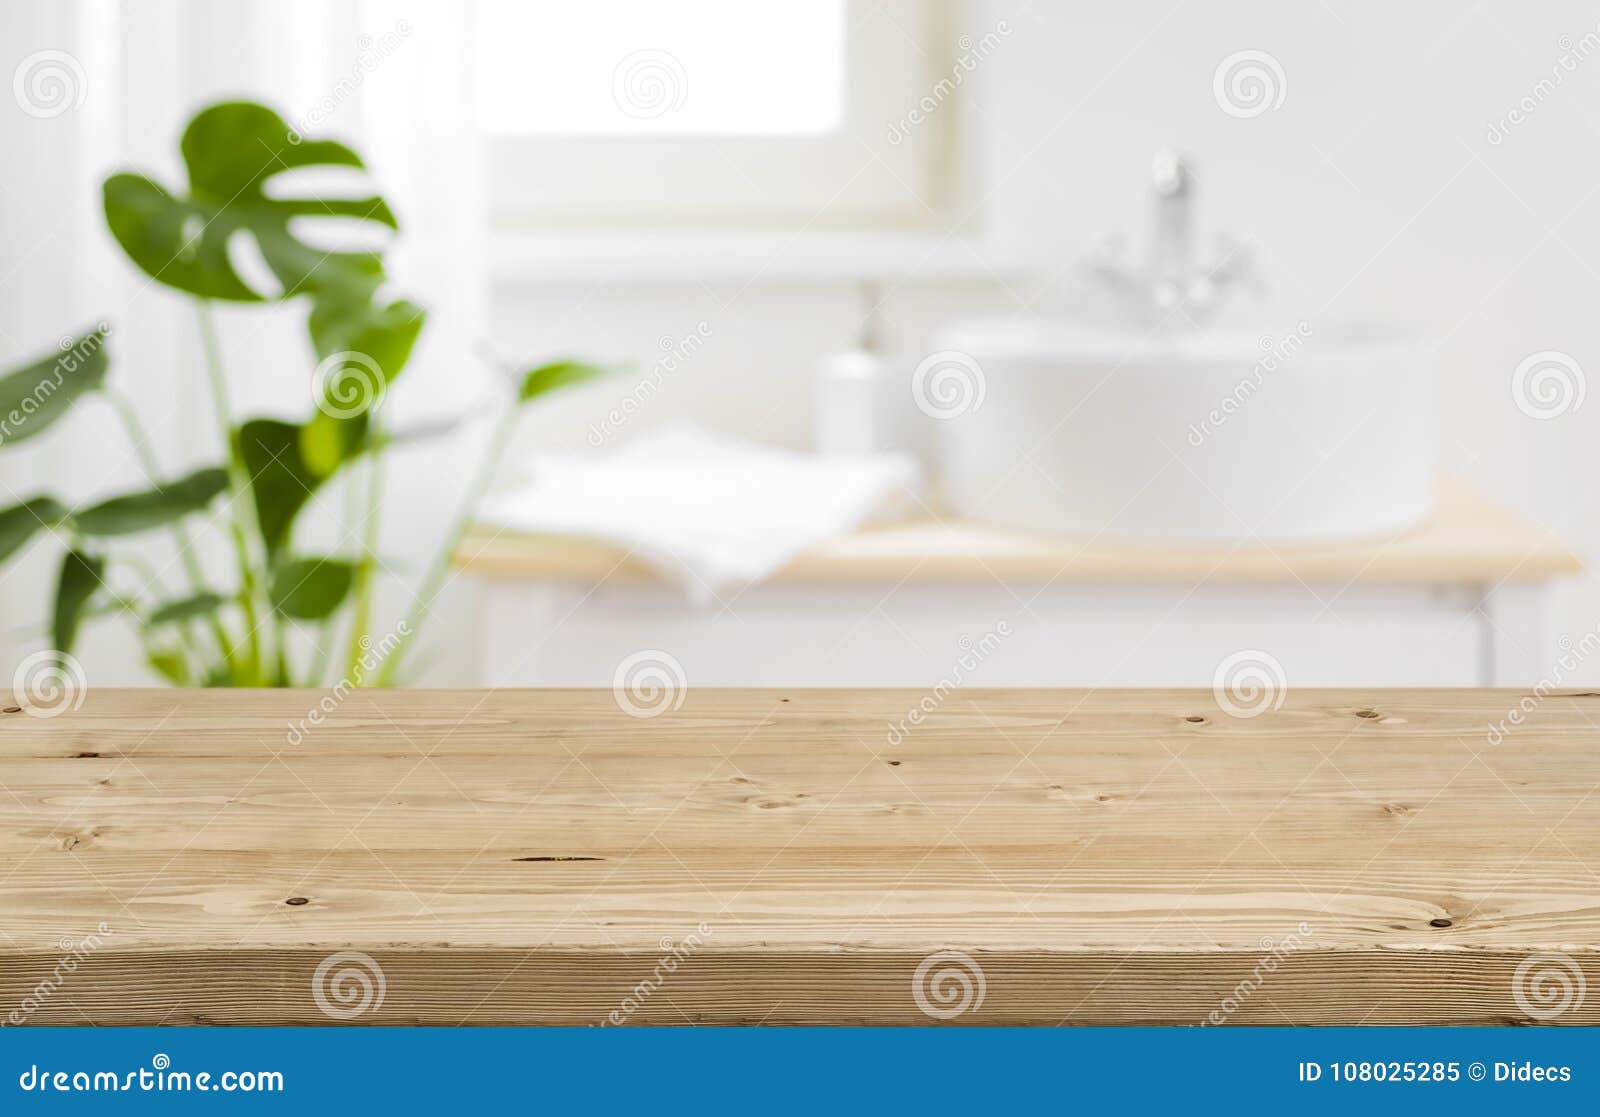 empty tabletop for product display with blurred bathroom interior background